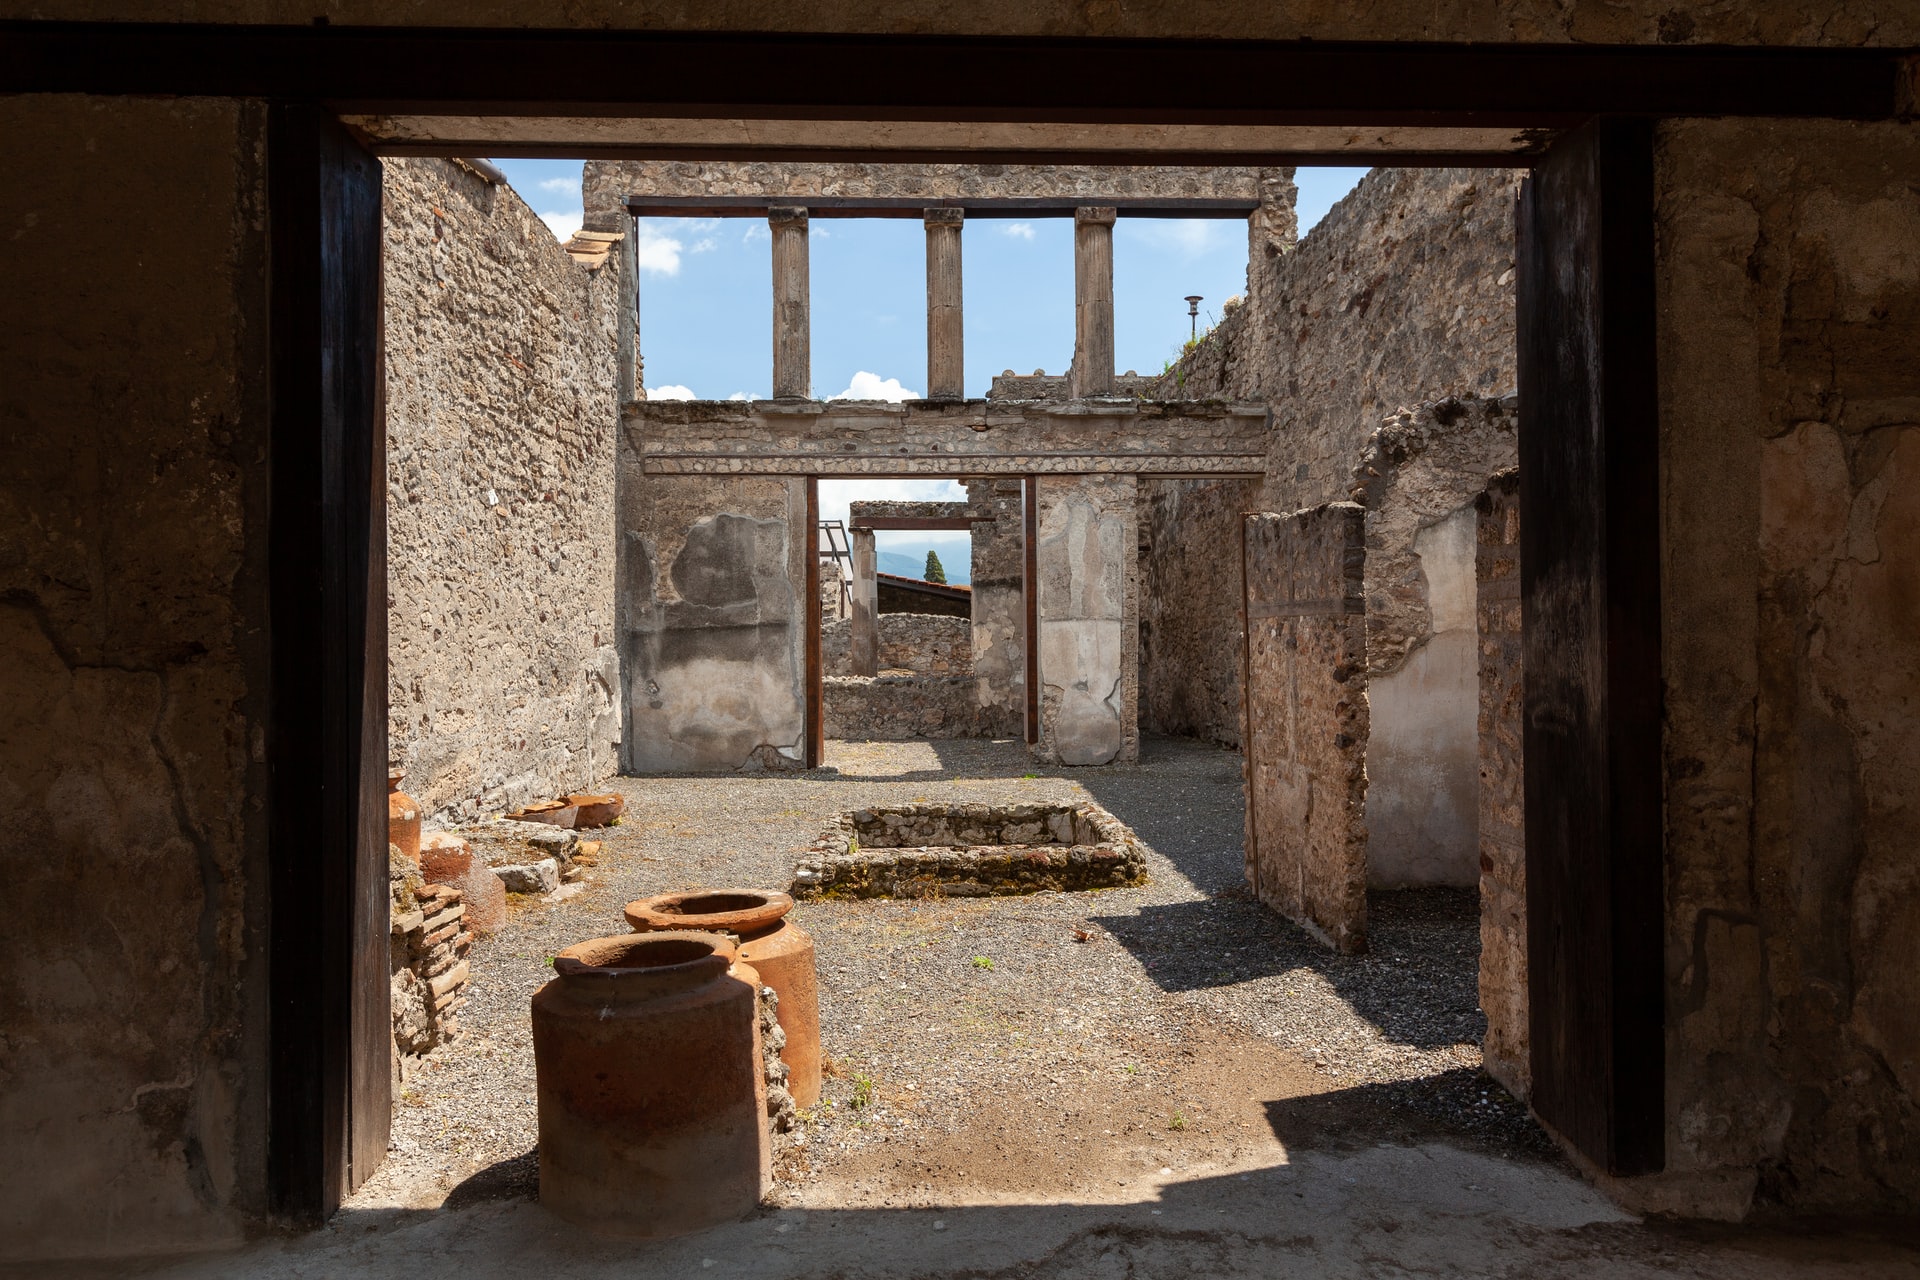 Tips and Tricks to visit Pompeii